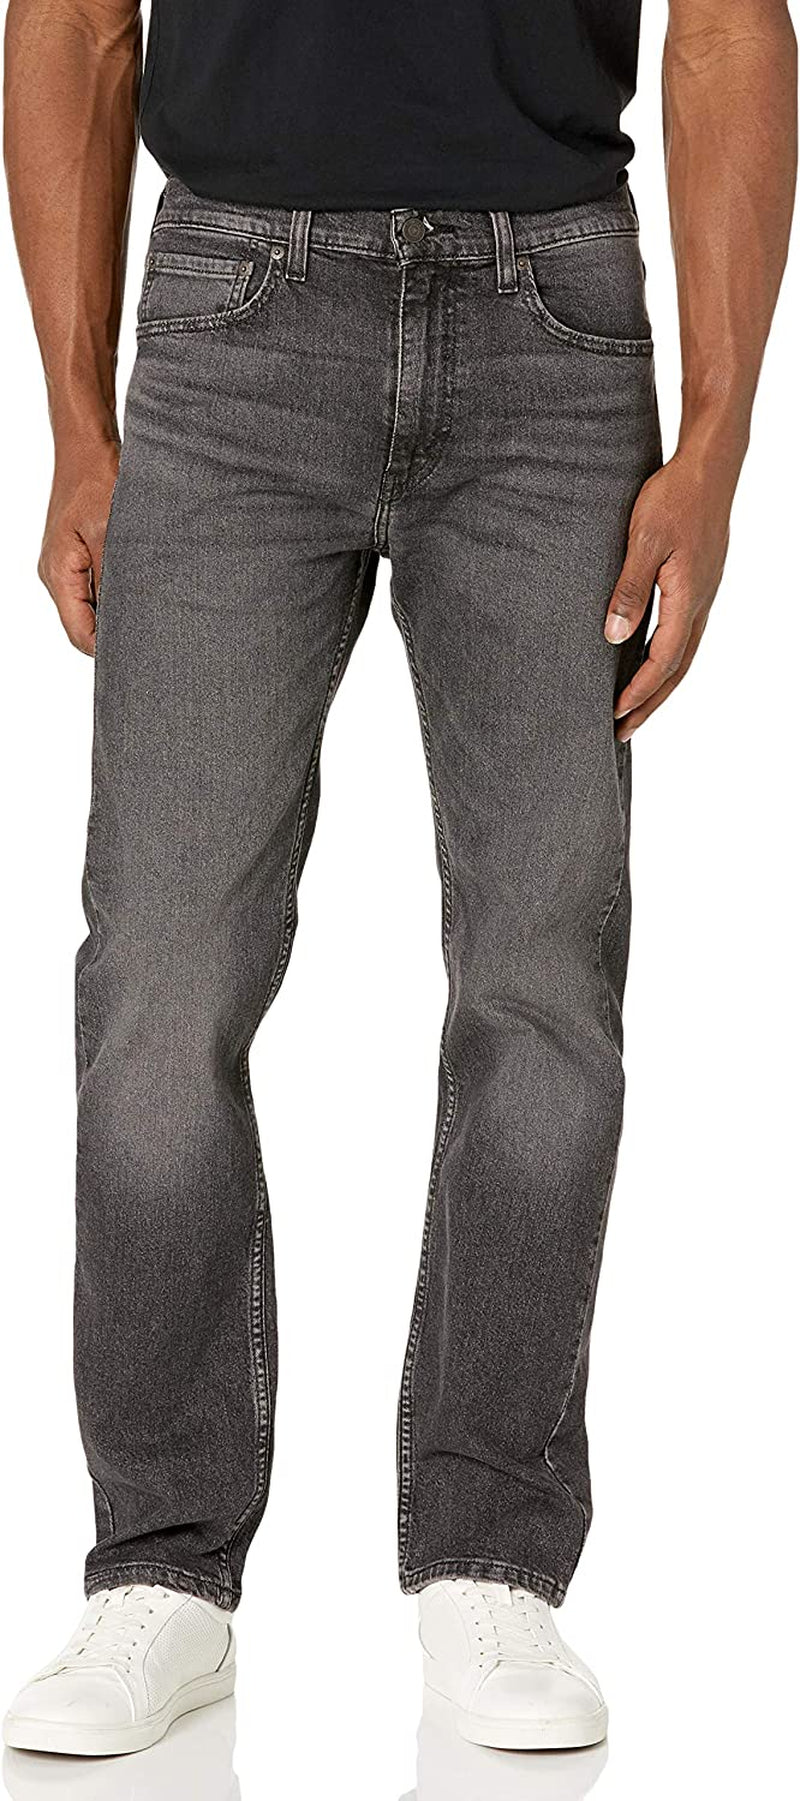 Cotton Levi's jeans. Five-pocket styling. Zip-fly. Belt loops at waistband. 